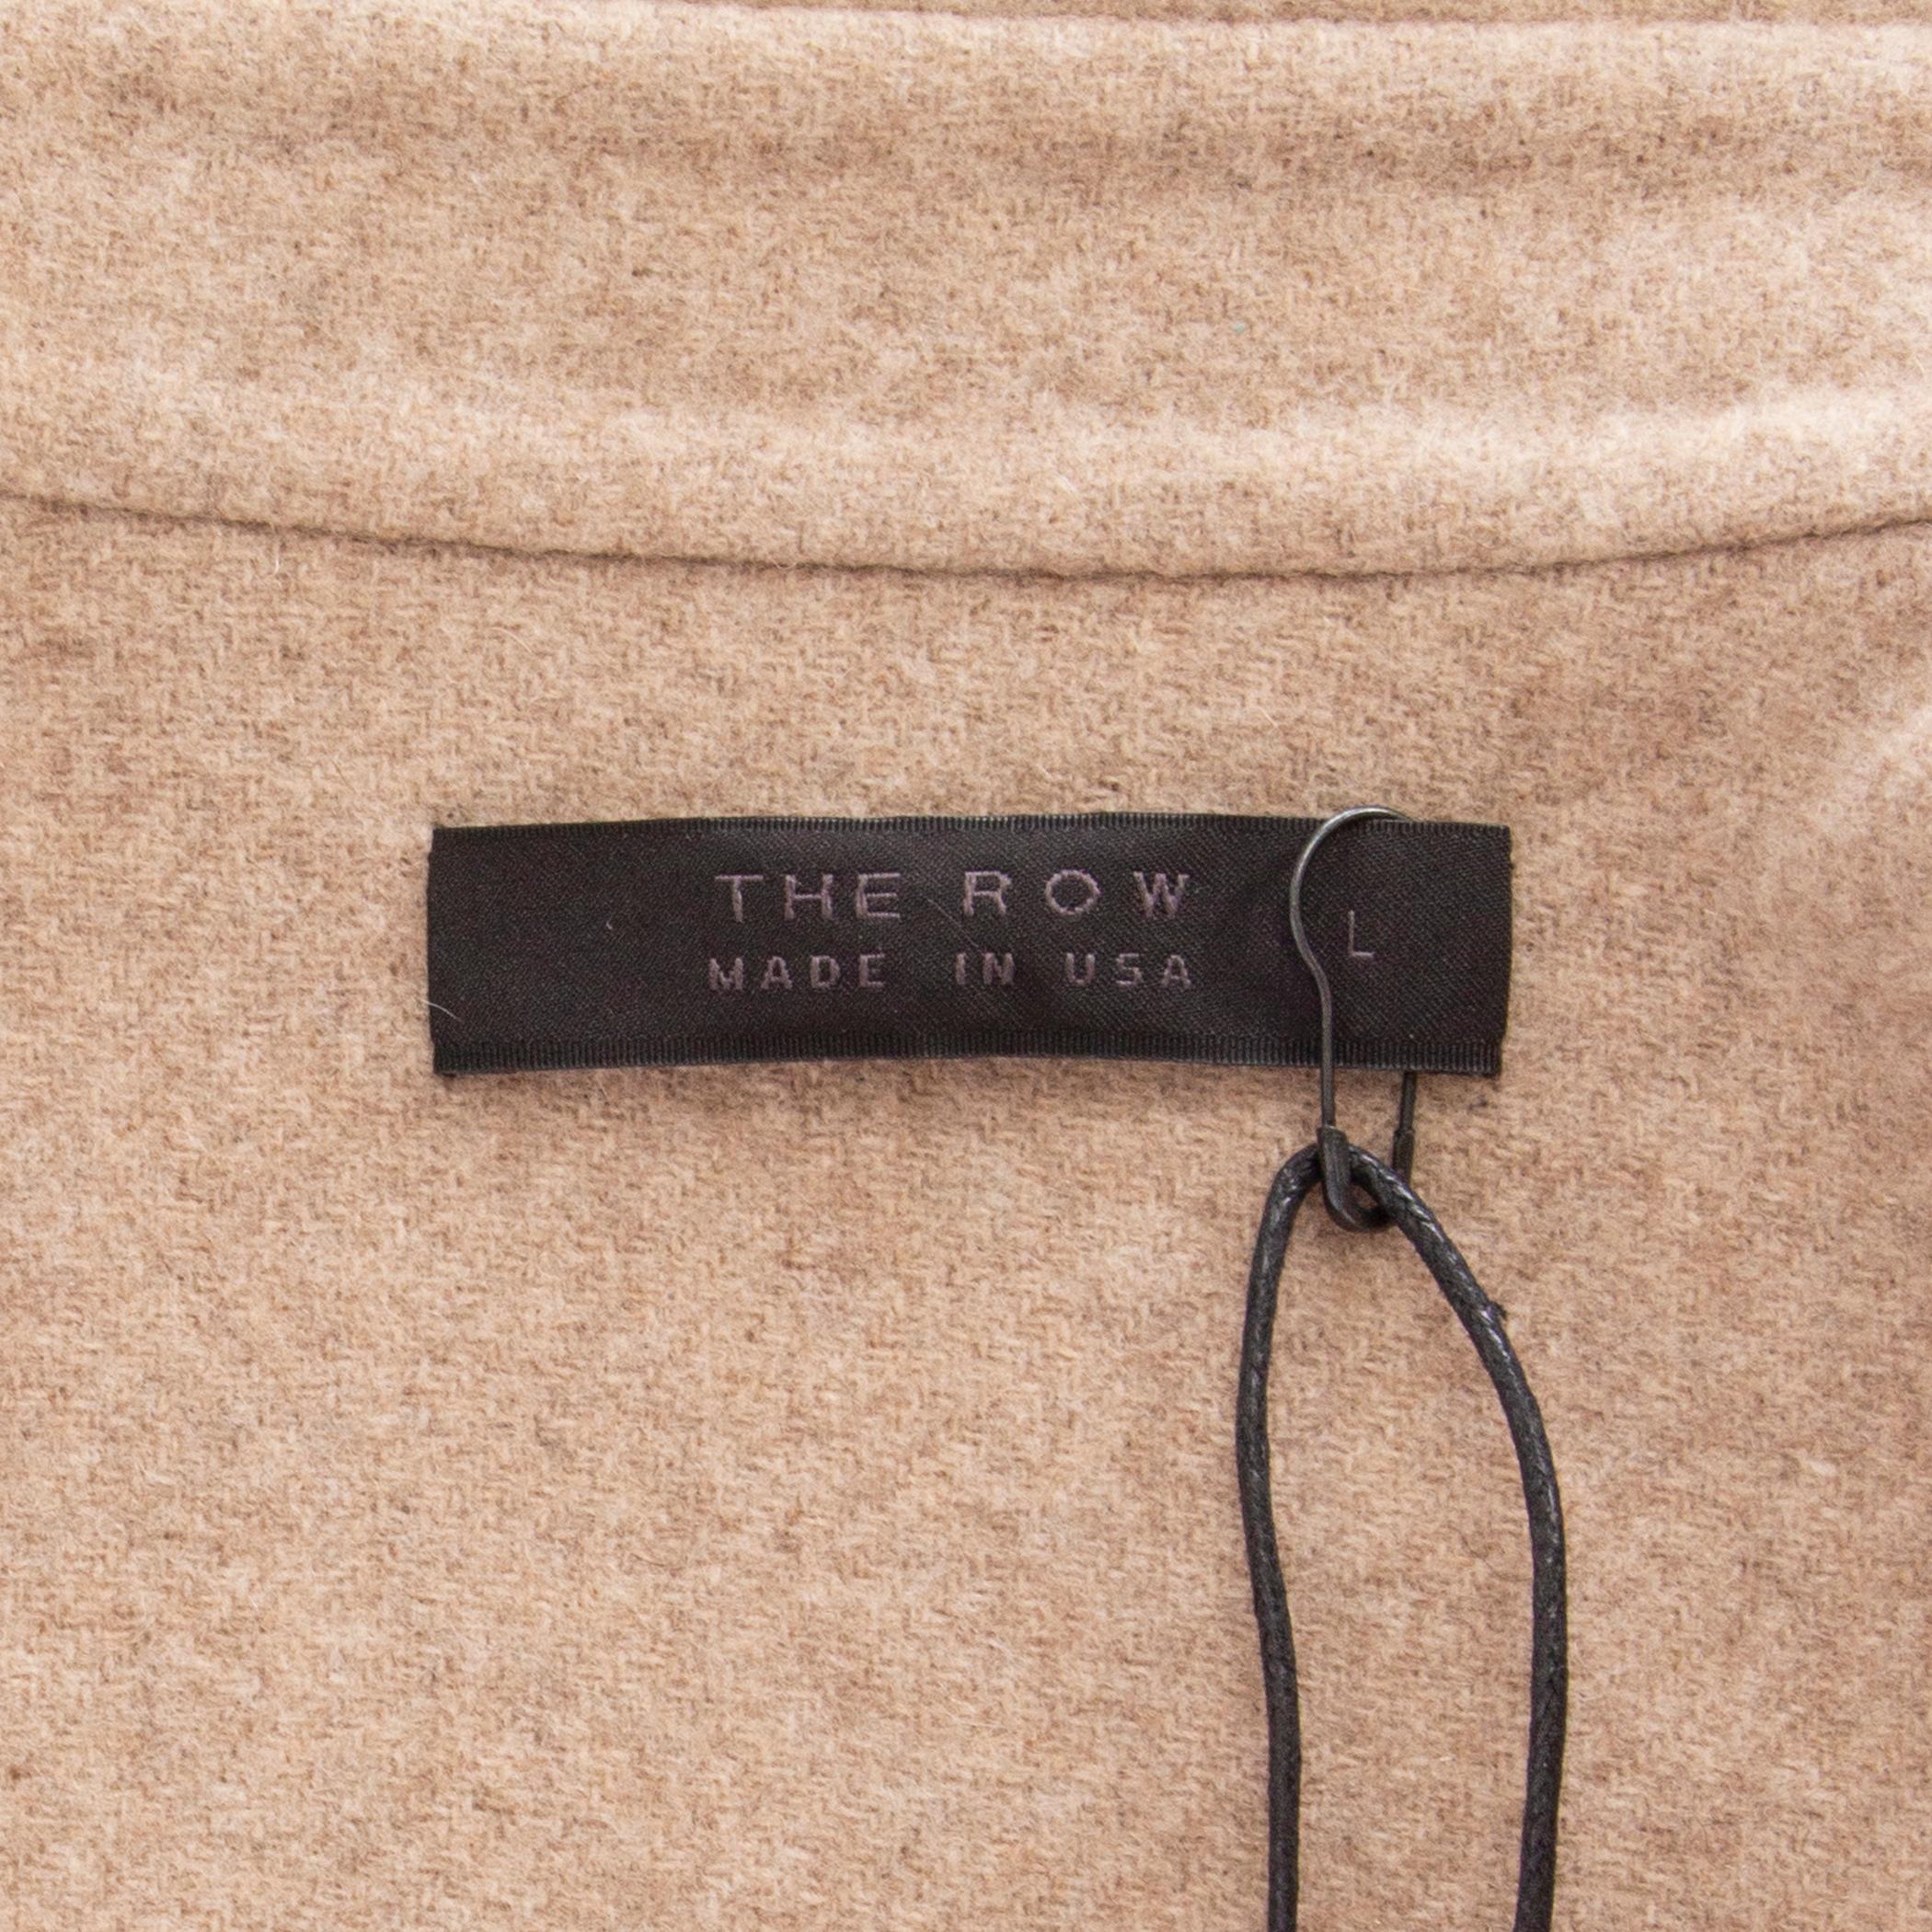 THE ROW beige cashmere SINGE BREASTED Coat Jacket L For Sale 1